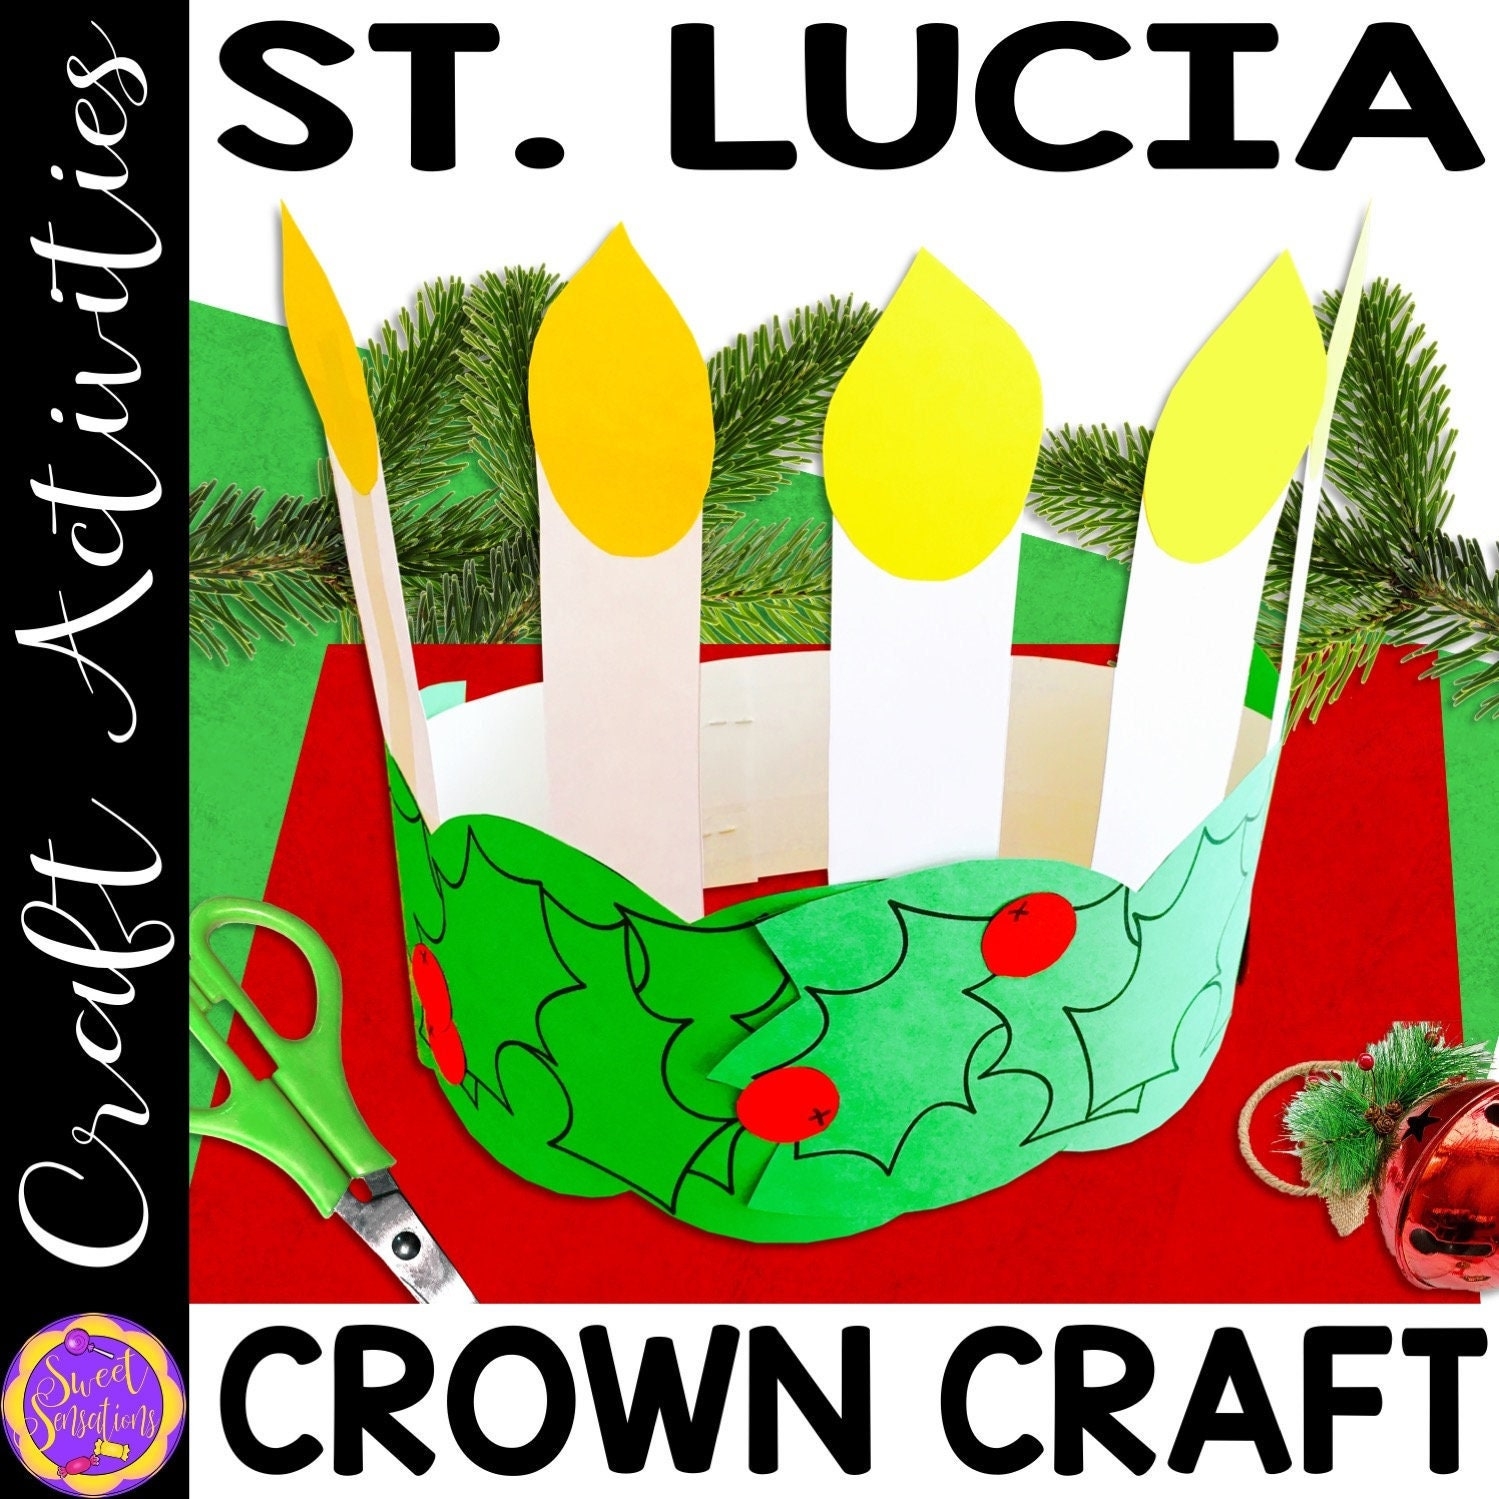 St Lucia Crown Digital Printable Template St Lucia Day Swedish Christmas Easy Paper Crown Craft Christmas In Sweden Etsy